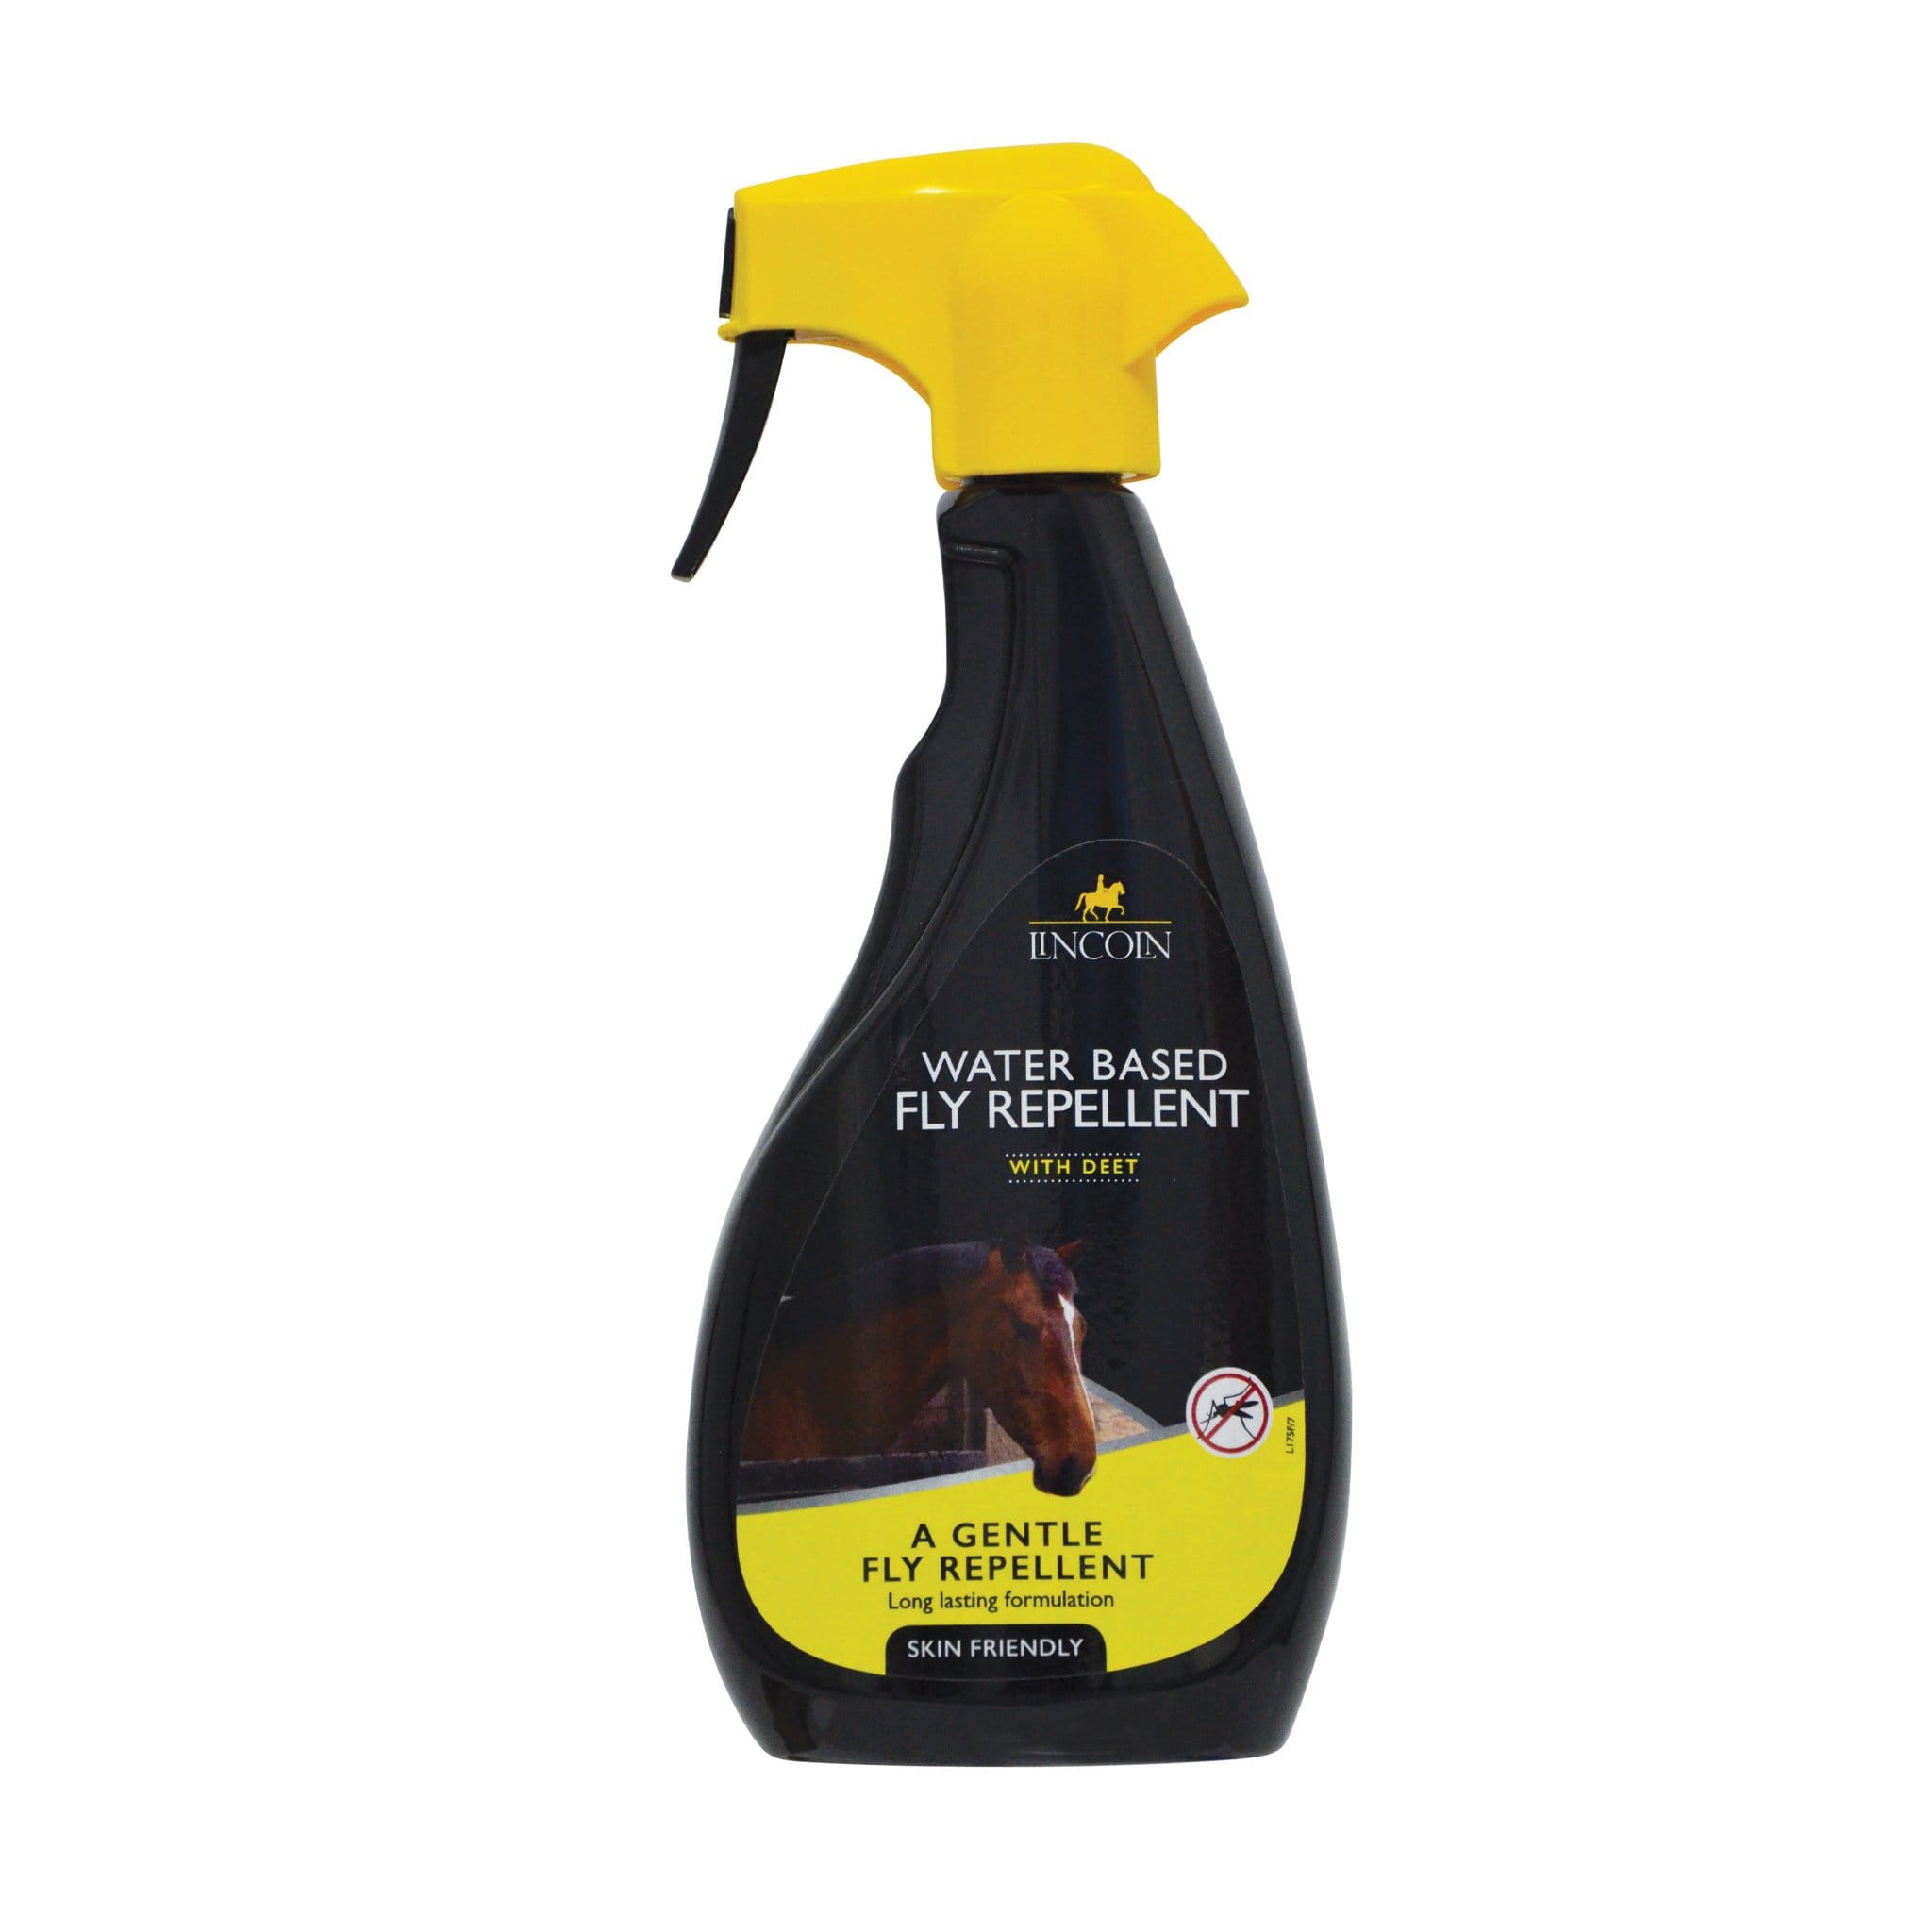 Lincoln Water Based Fly Repellent 4086